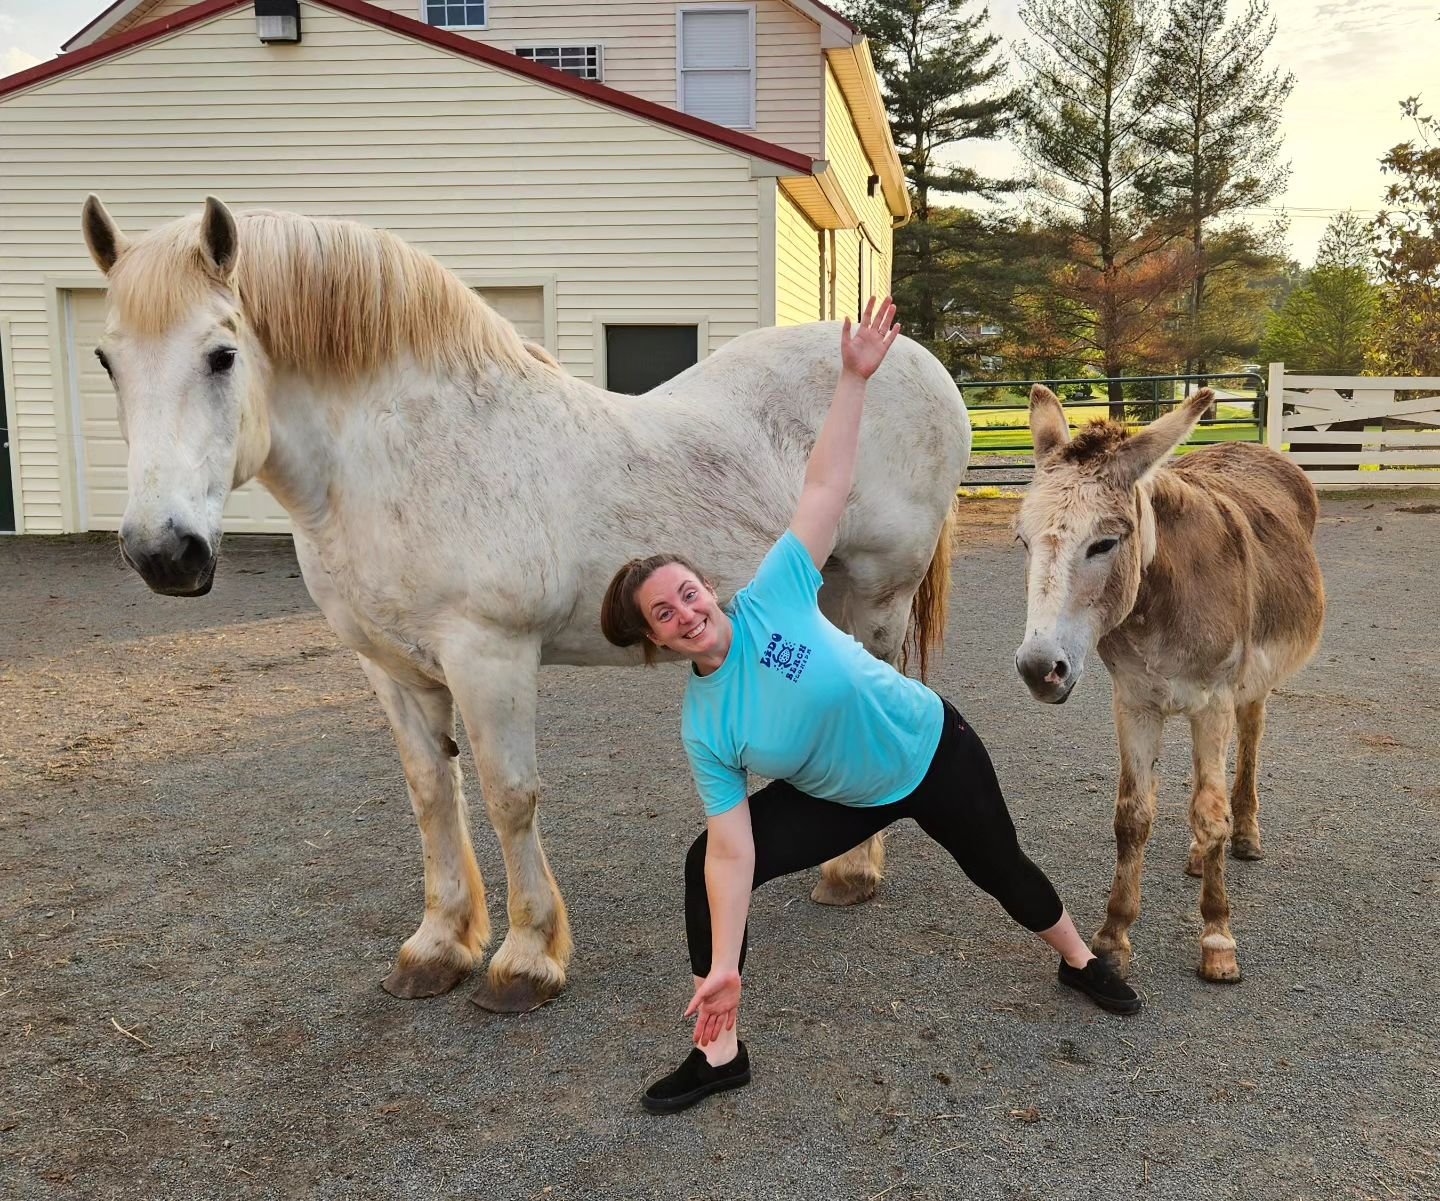 Yoga! Around horses! At @equineconnectioncenter next Friday, May 31 @ 6 PM!!

So psyched to be partnering with this amazing team dedicated to rescuing horses 🐎 come share your energy with these gentle giants and see what peace ✌️ it can bring!

Yogi